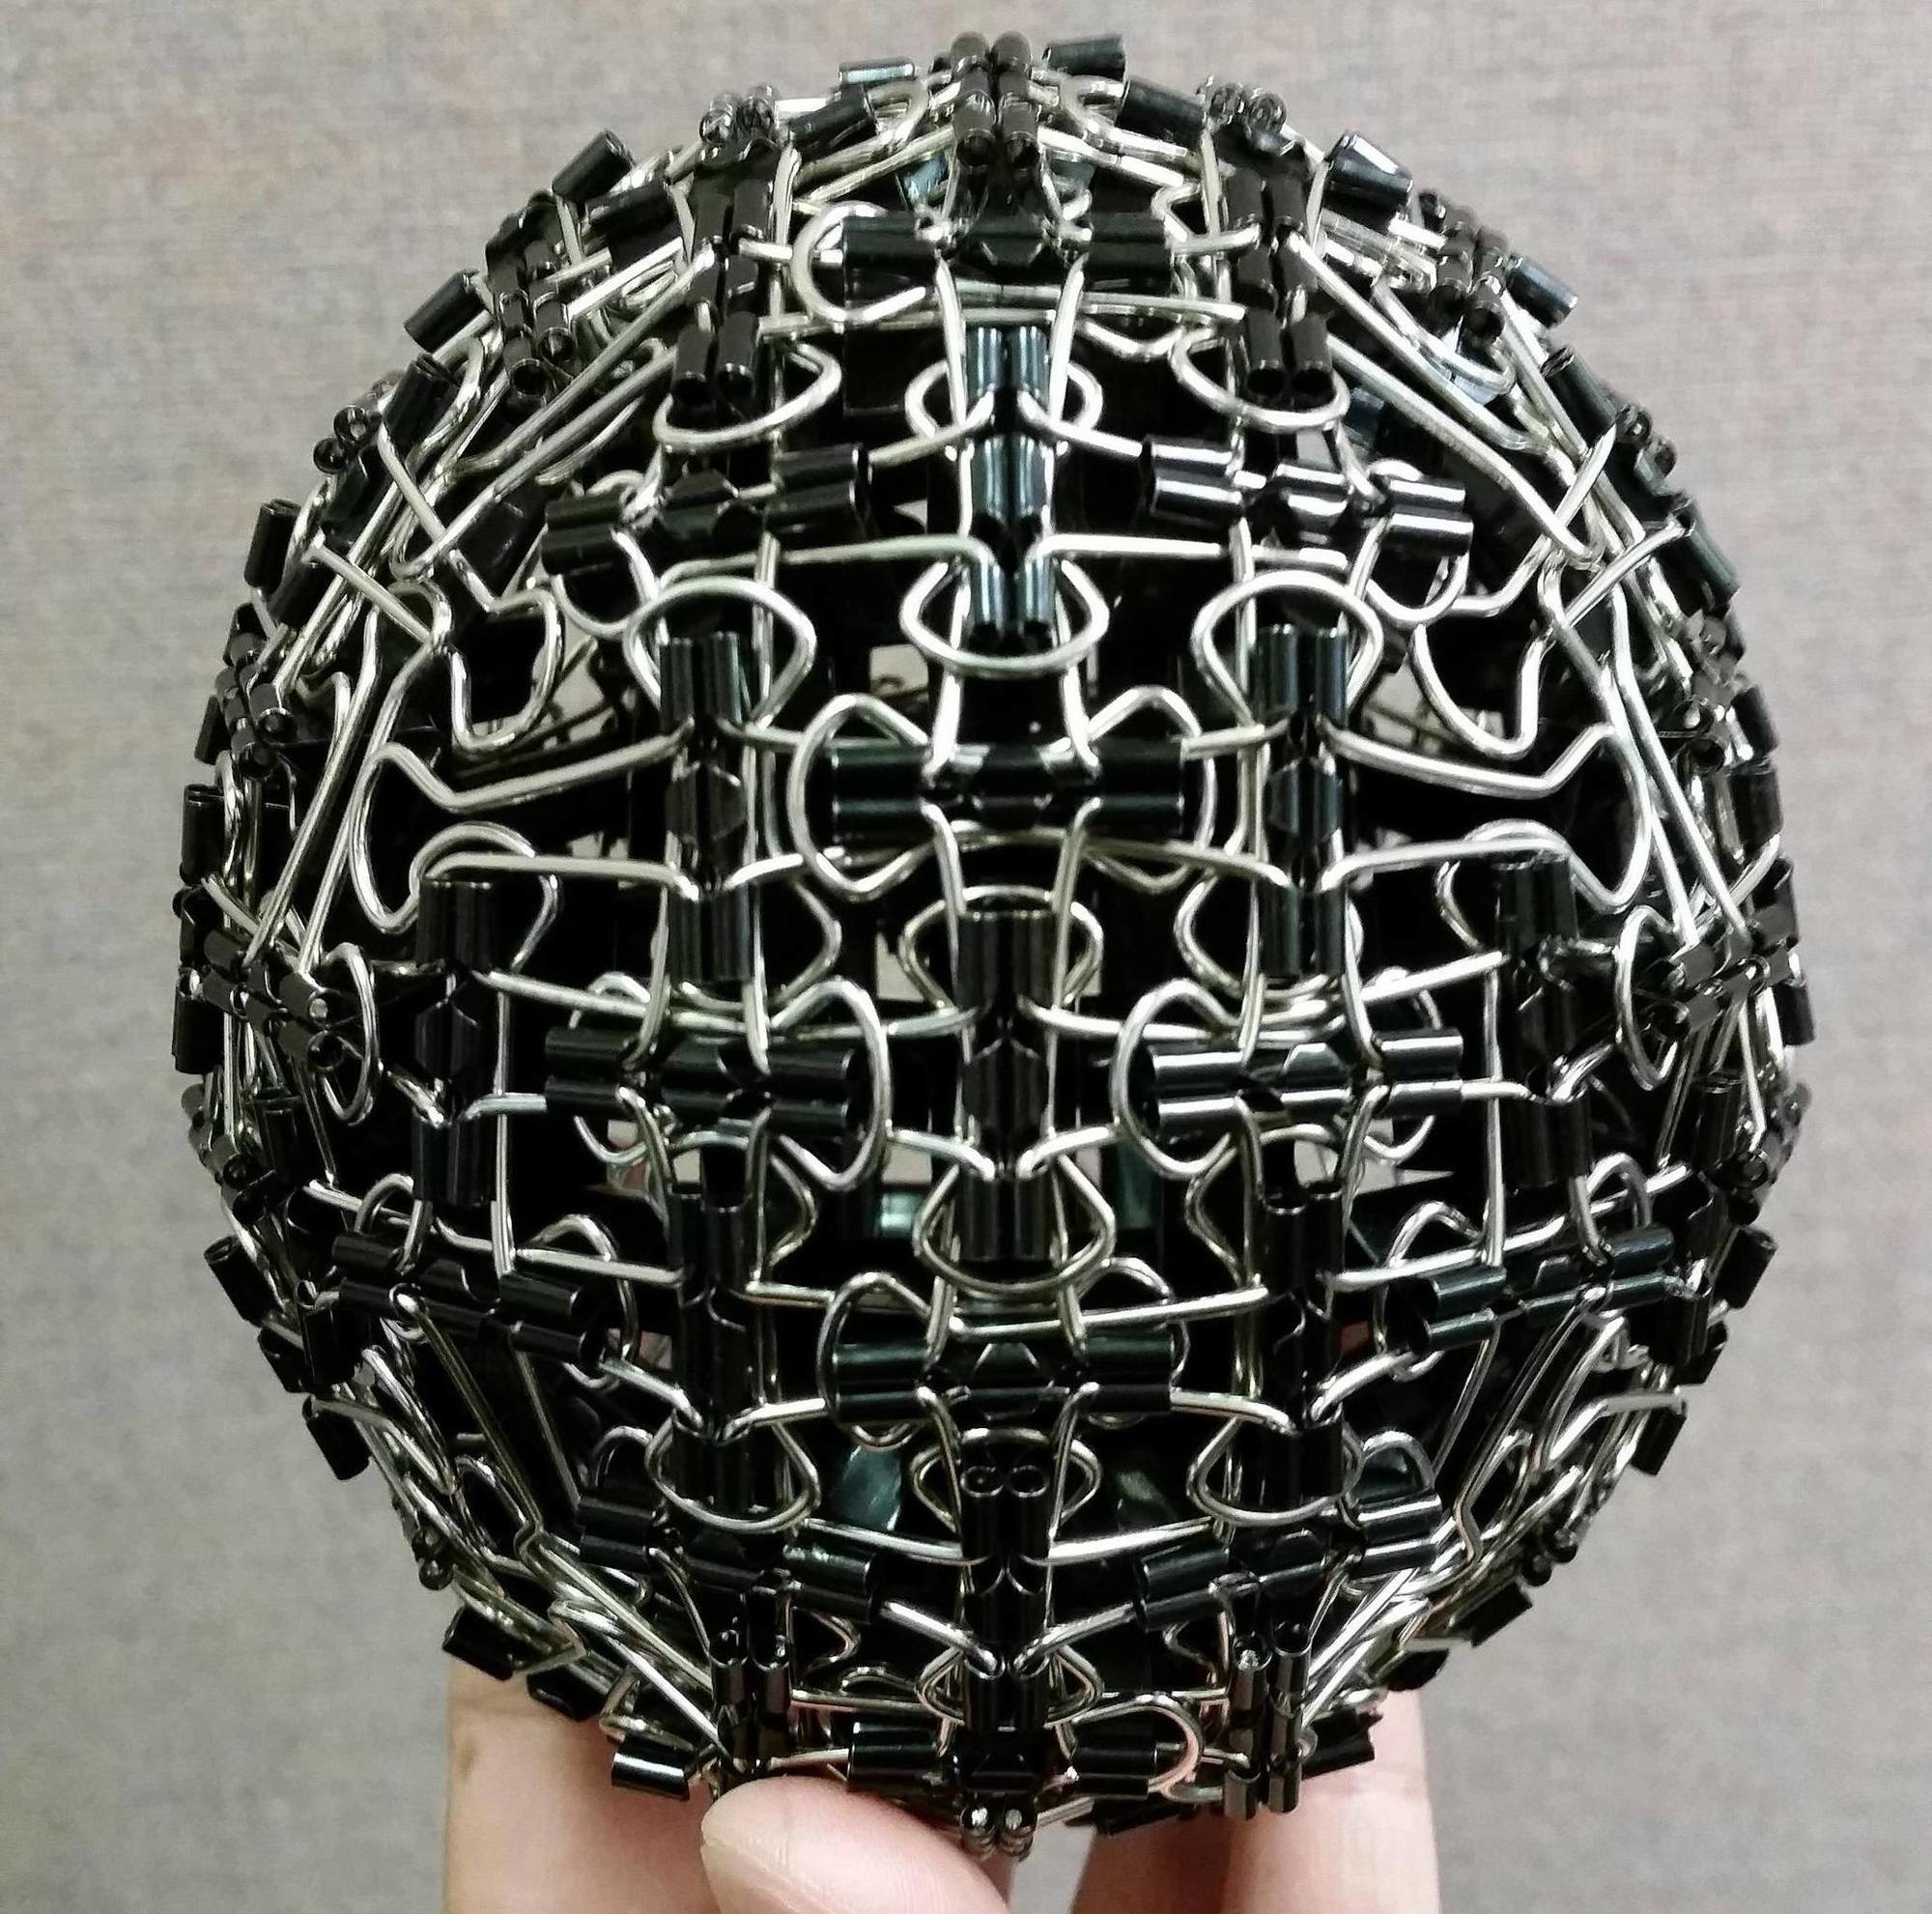 A ball made out of binder clips.